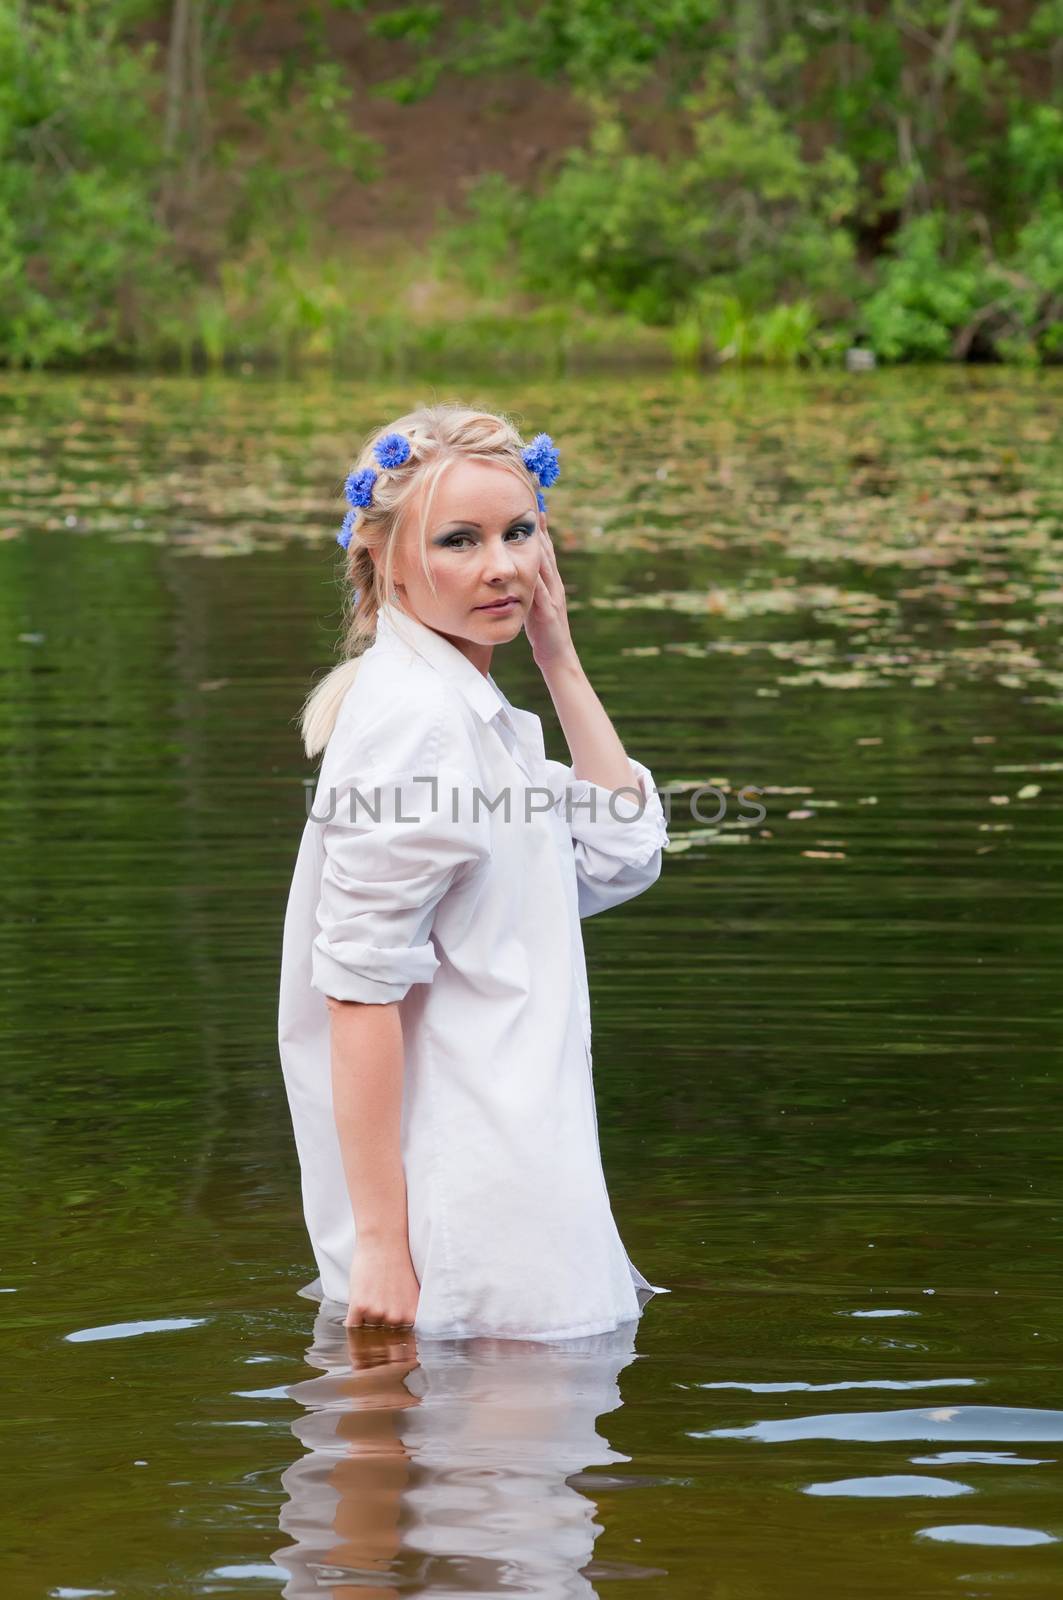 Beautiful woman in white standing in pond by anytka